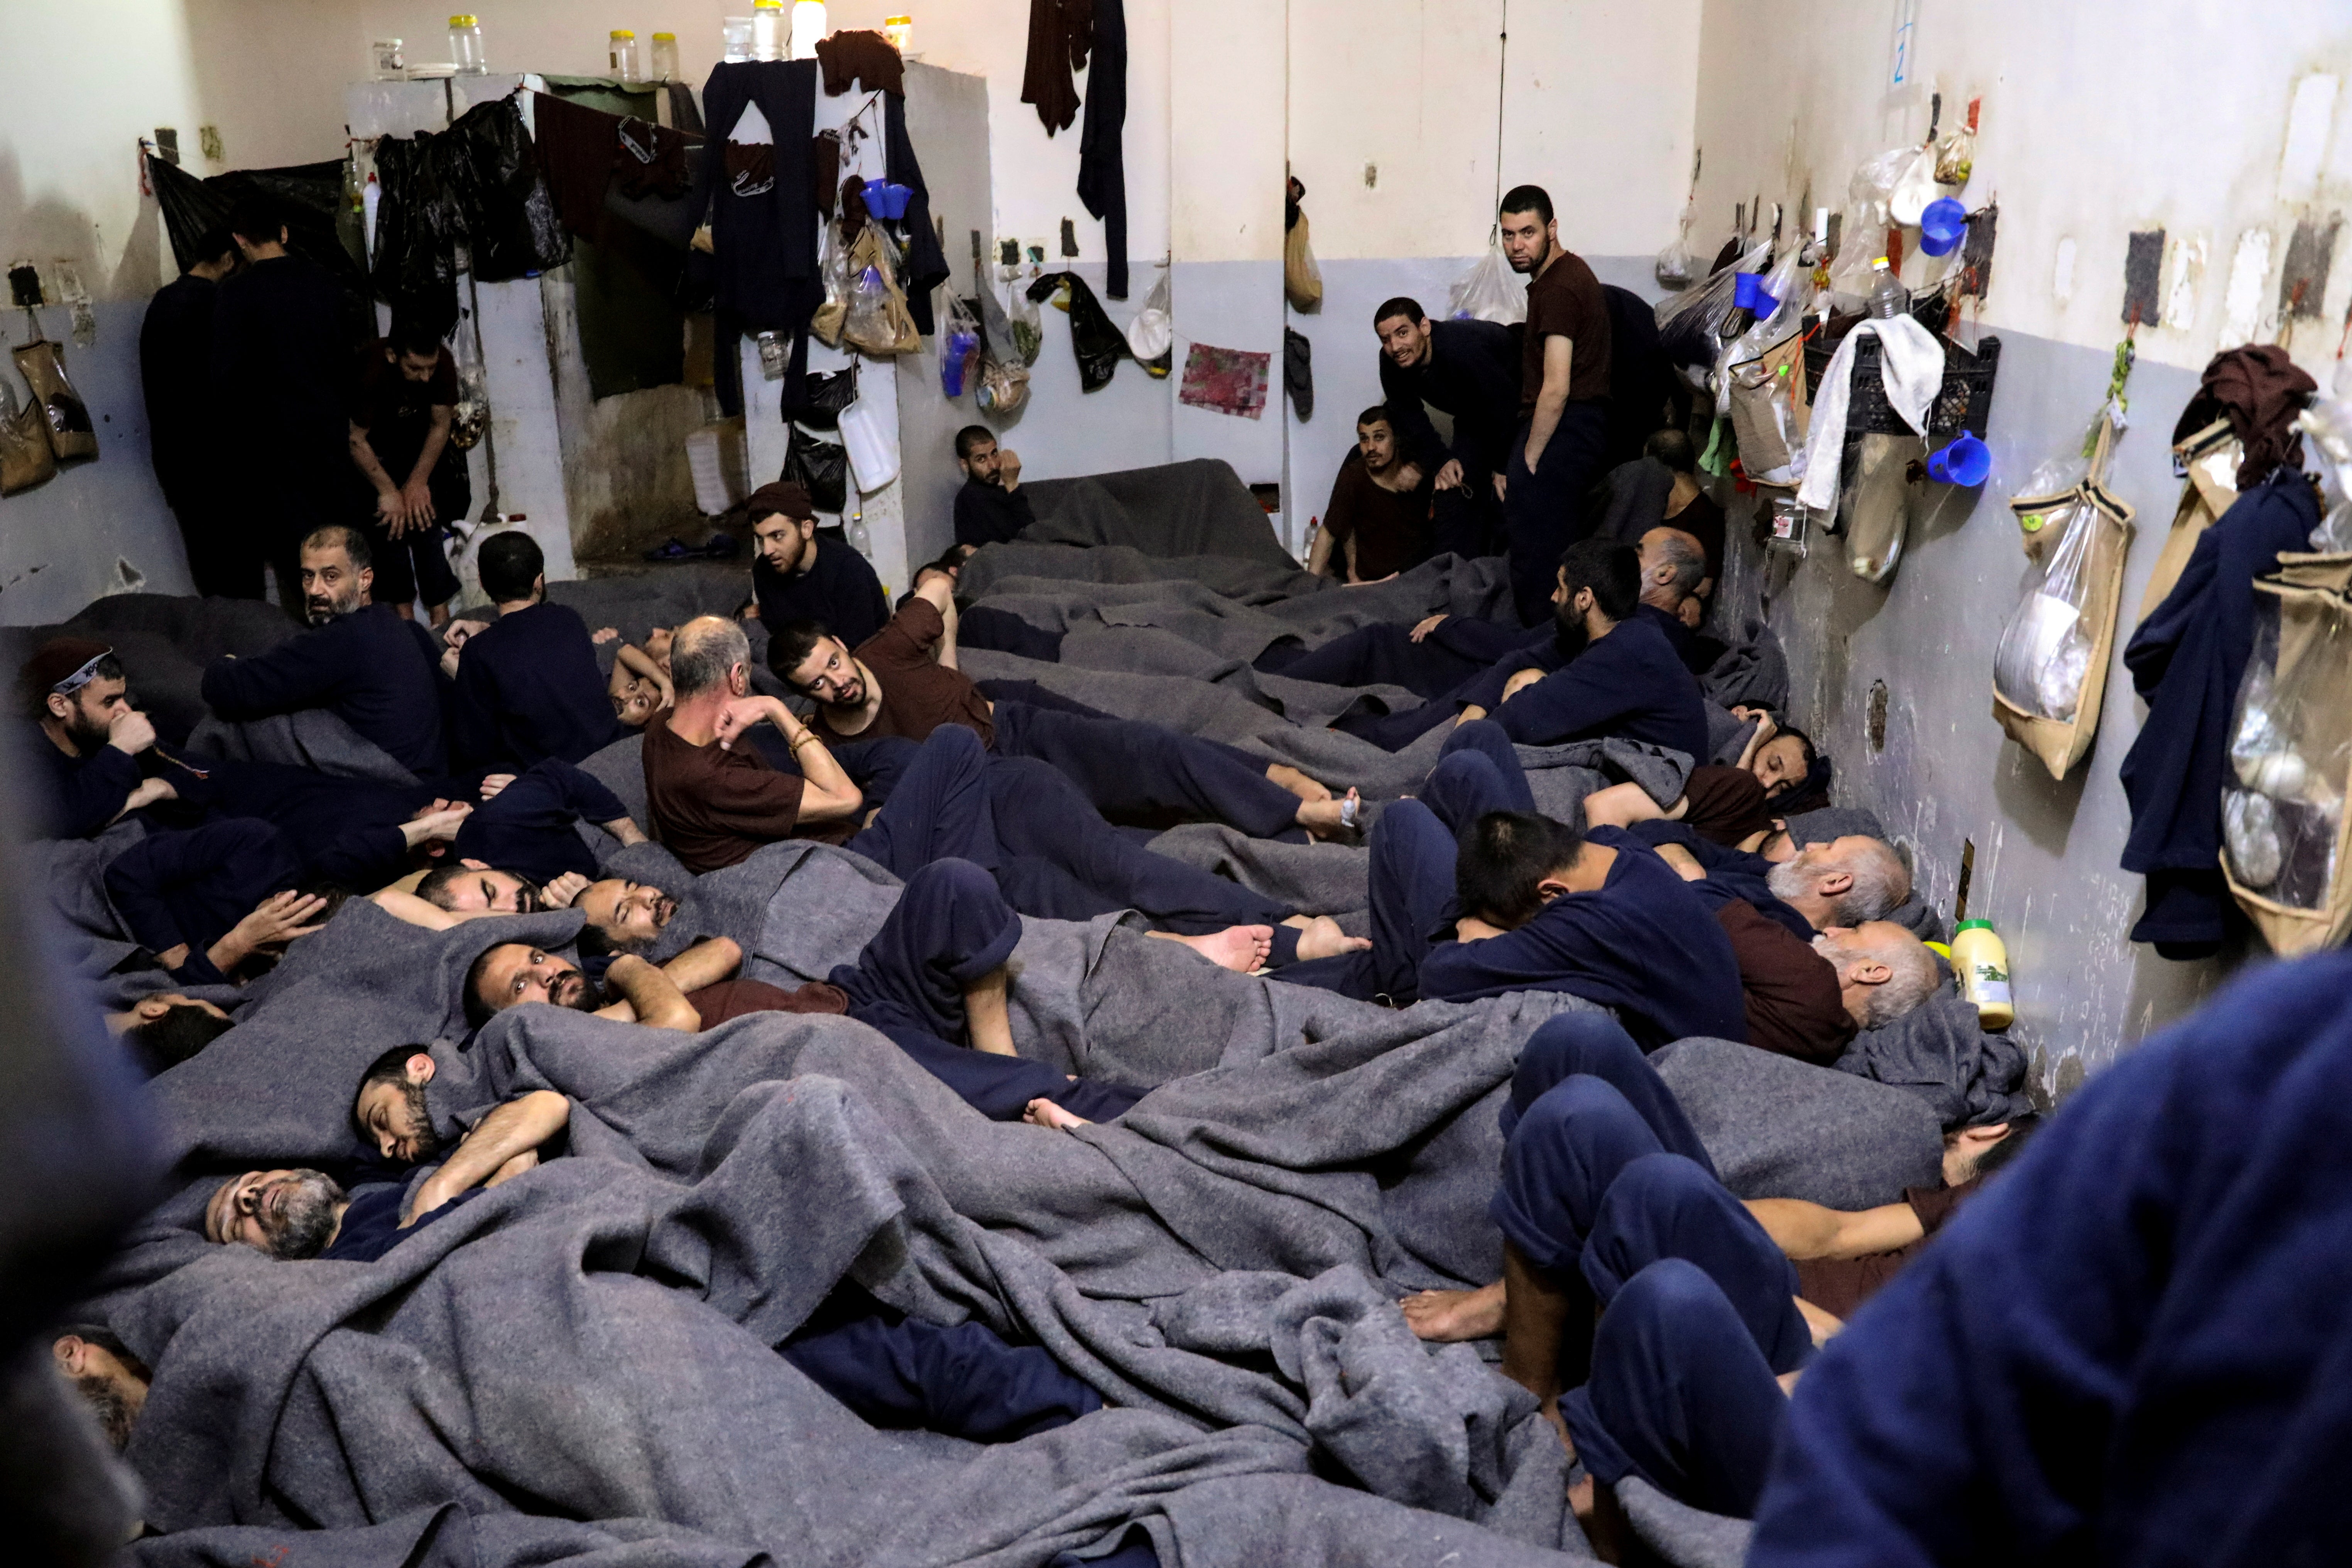 Foreign prisoners, suspected of being part of the Islamic State, lie in a prison cell in Hasaka, Syria, in January